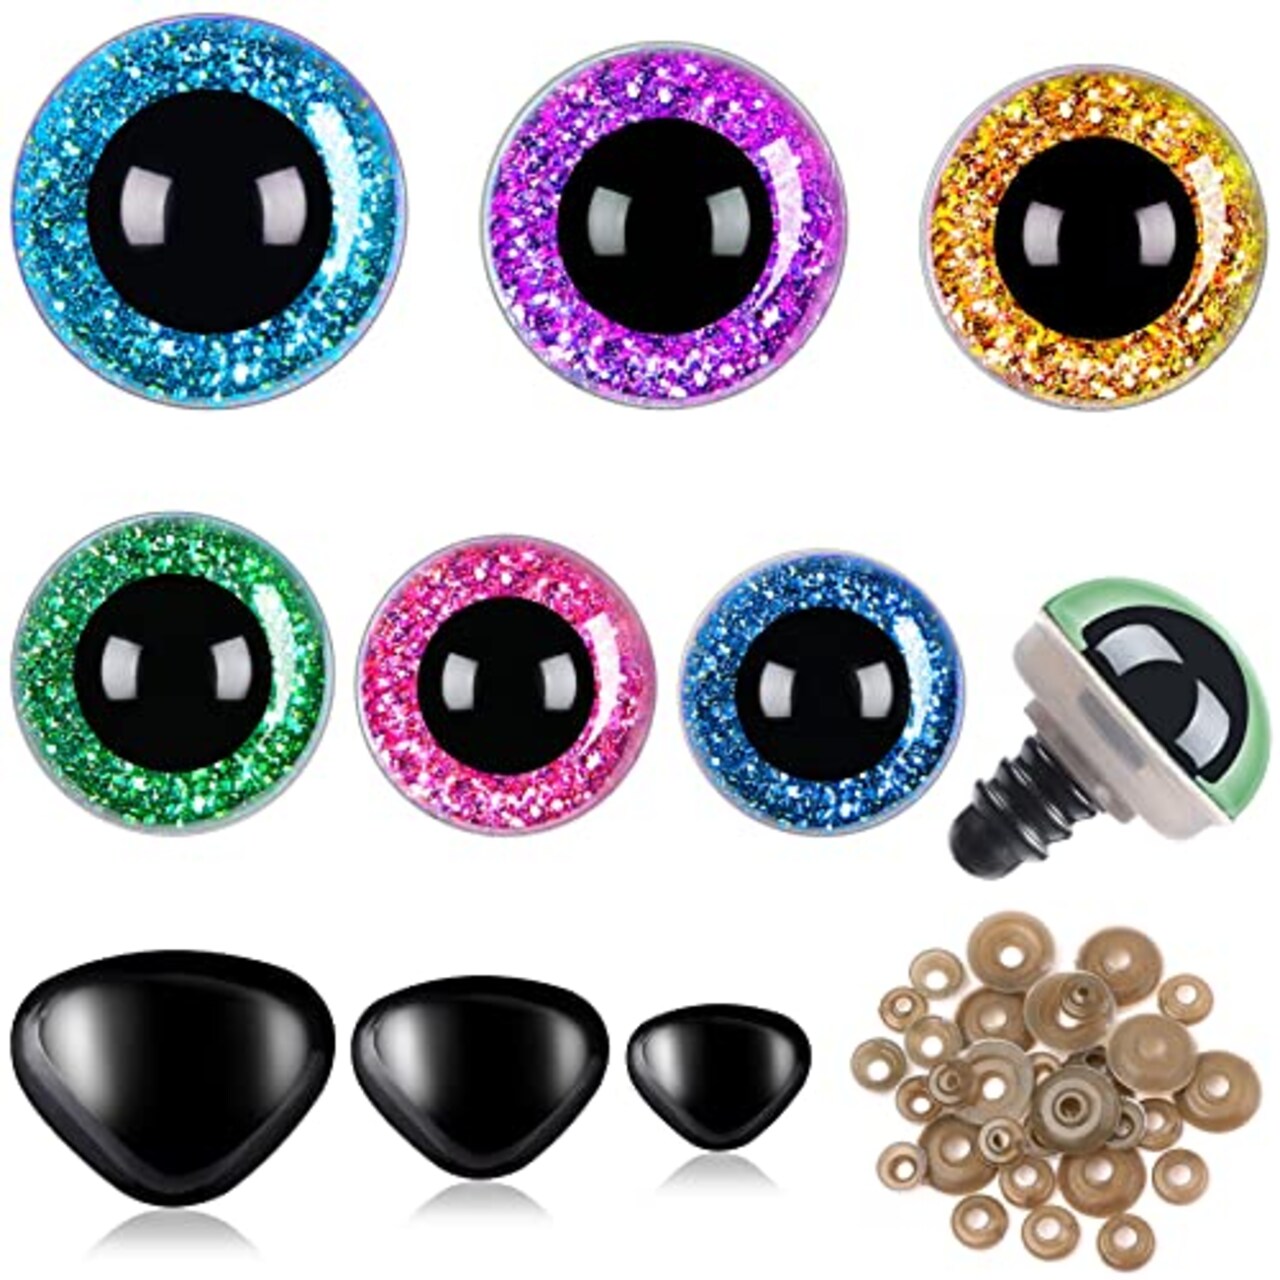 UPINS 180 Pieces 10-20 mm Large Safety Eyes and Nose with Washers for  Amigurumi Stuffed Animal Eyes Plastic Craft Doll Crochet Eyes for DIY of  Puppet, Bear, Toy Making Supplies (Assorted Colors)